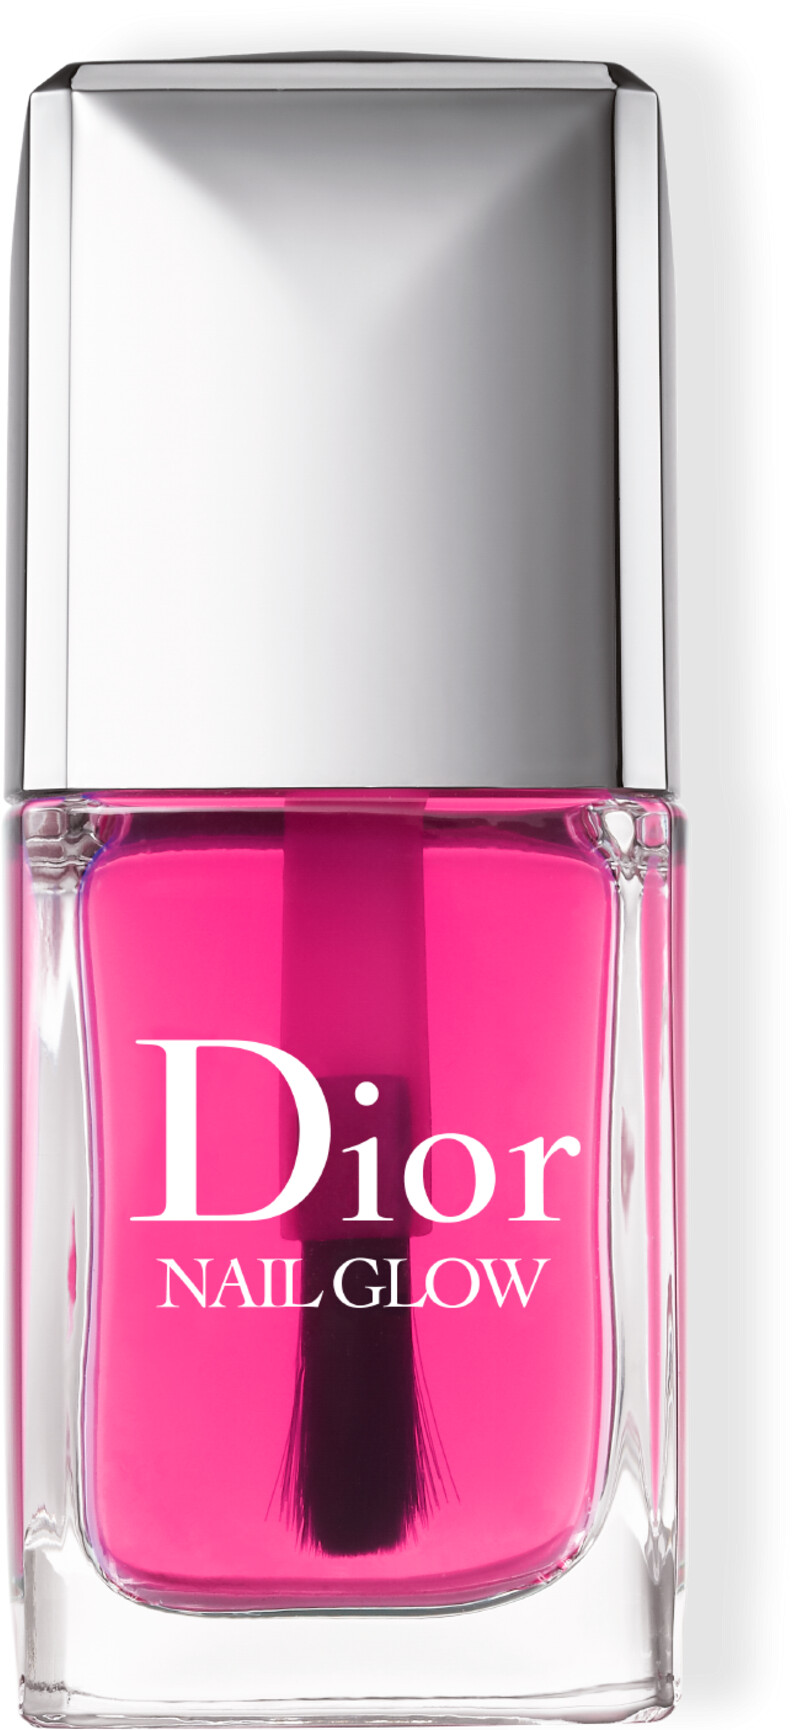 DIOR Addict Nail Glow Instant French Manicure Effect Brightening Treatment